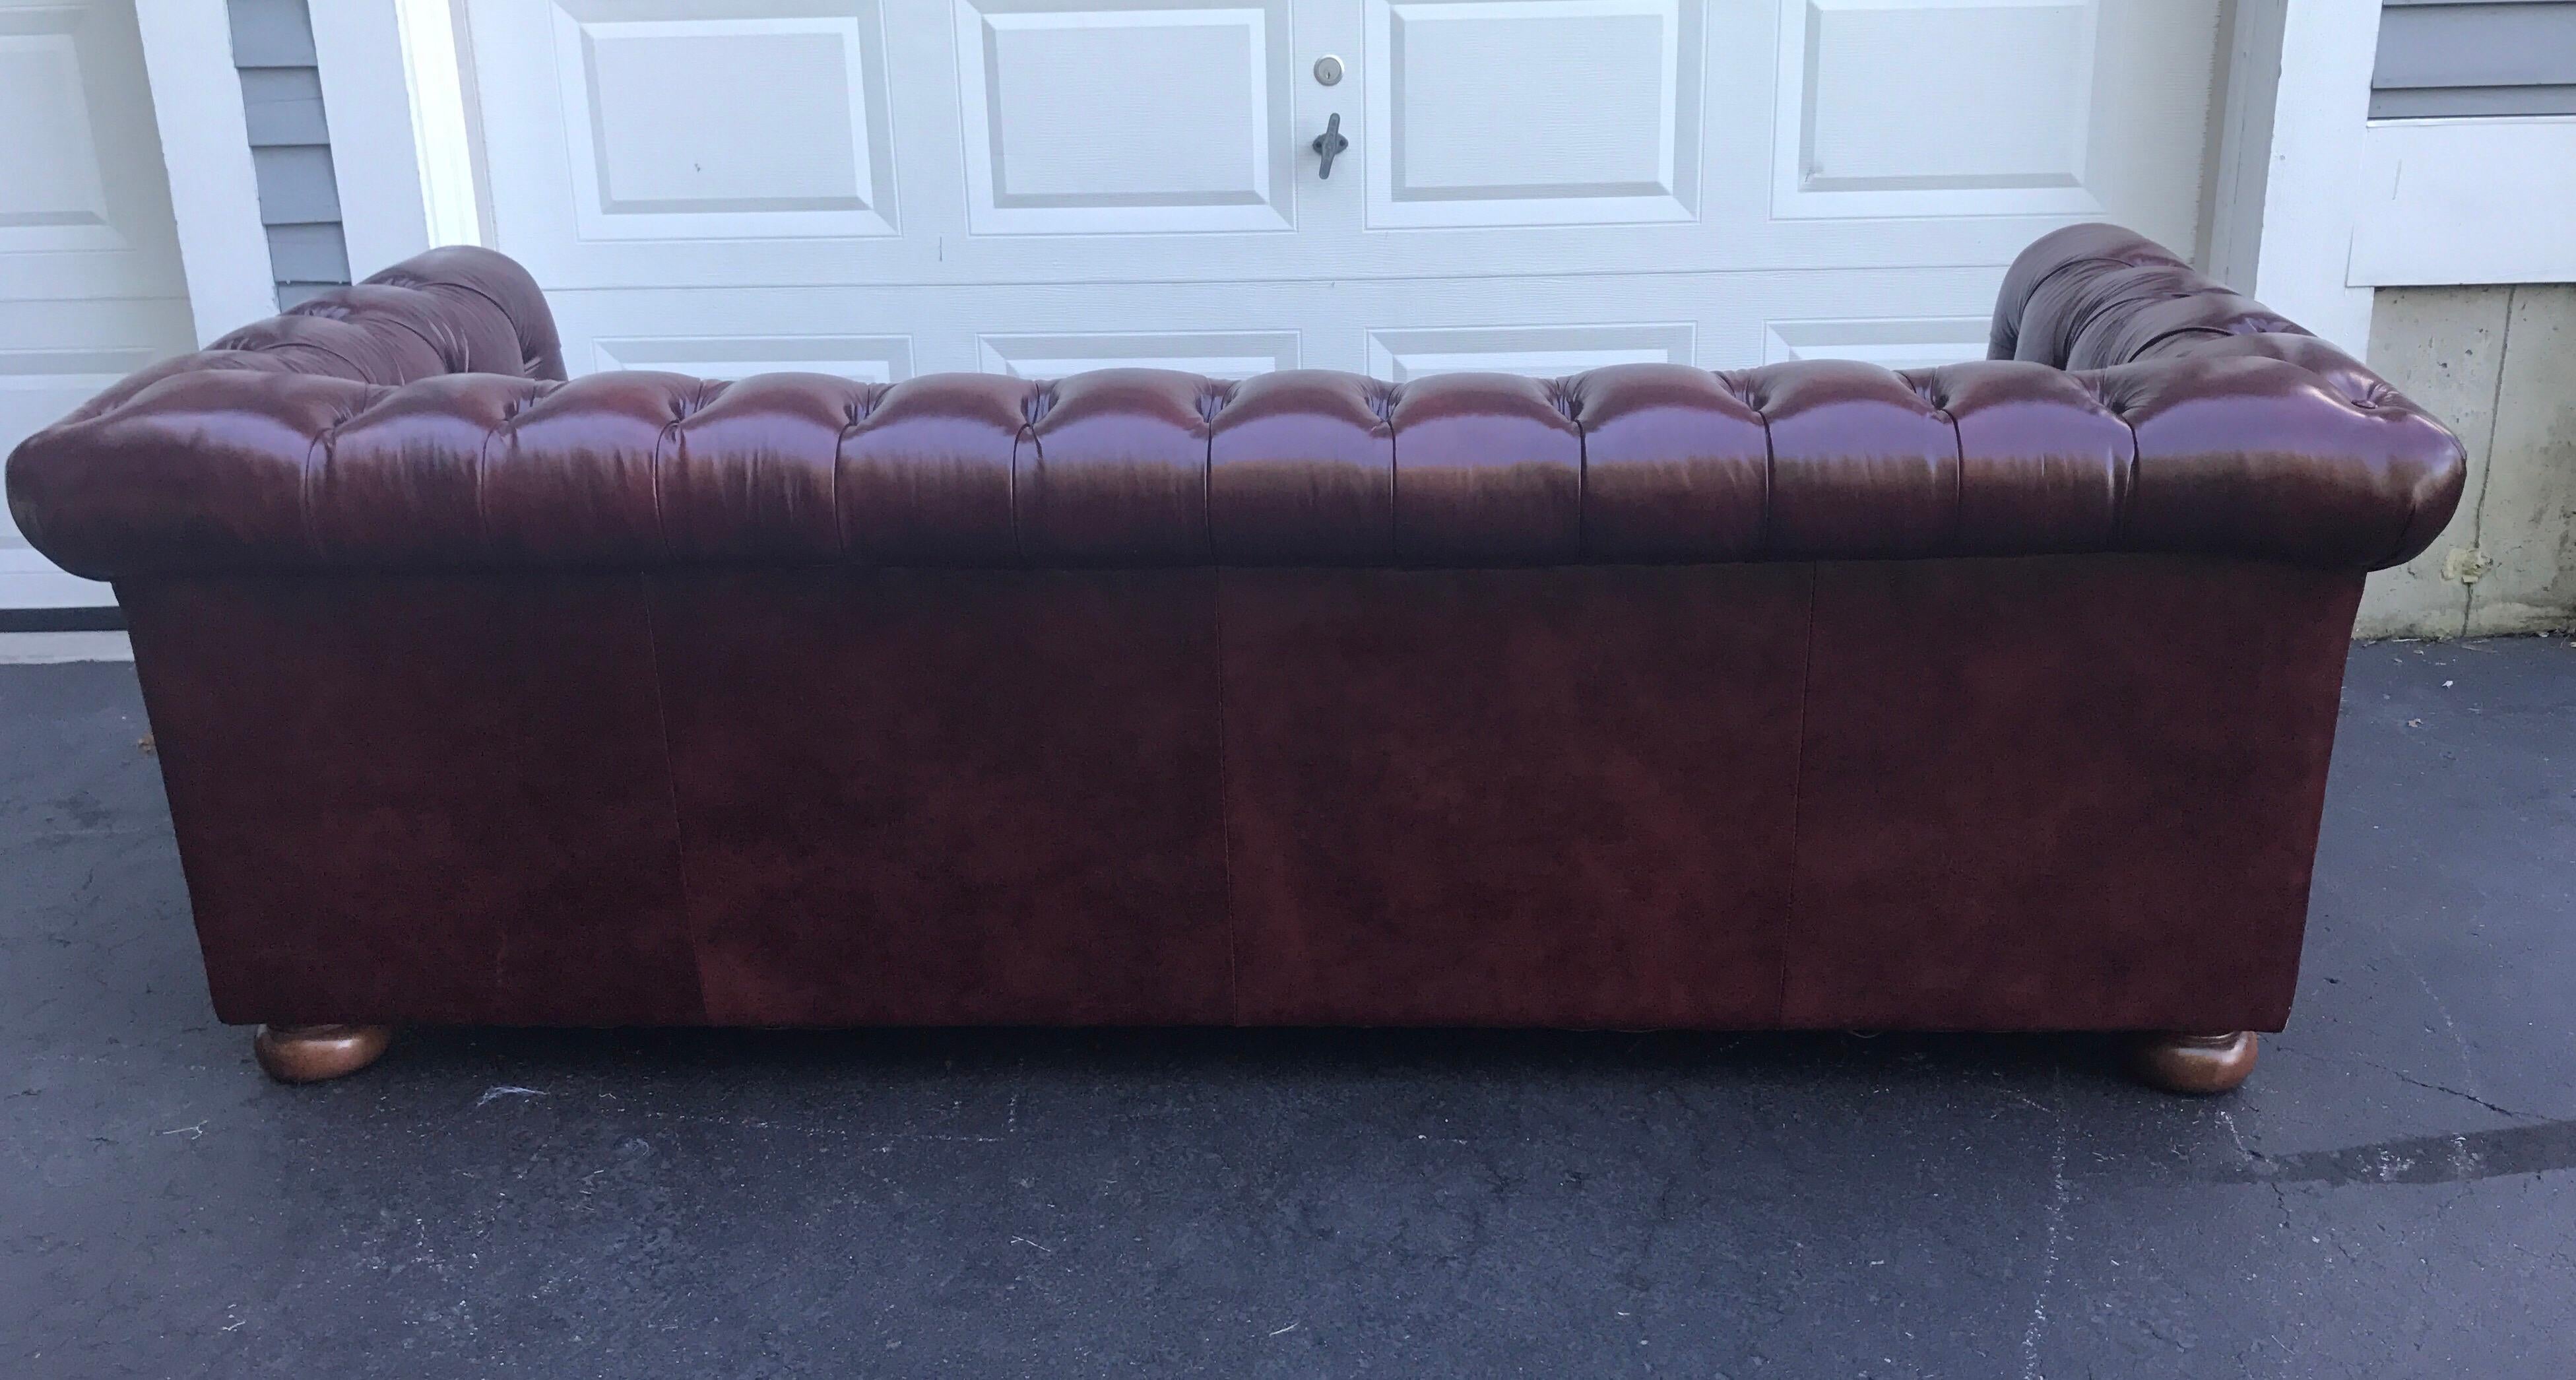 Brass Vintage English Oxblood Merlot Leather Chesterfield Tufted Sofa with Nailheads